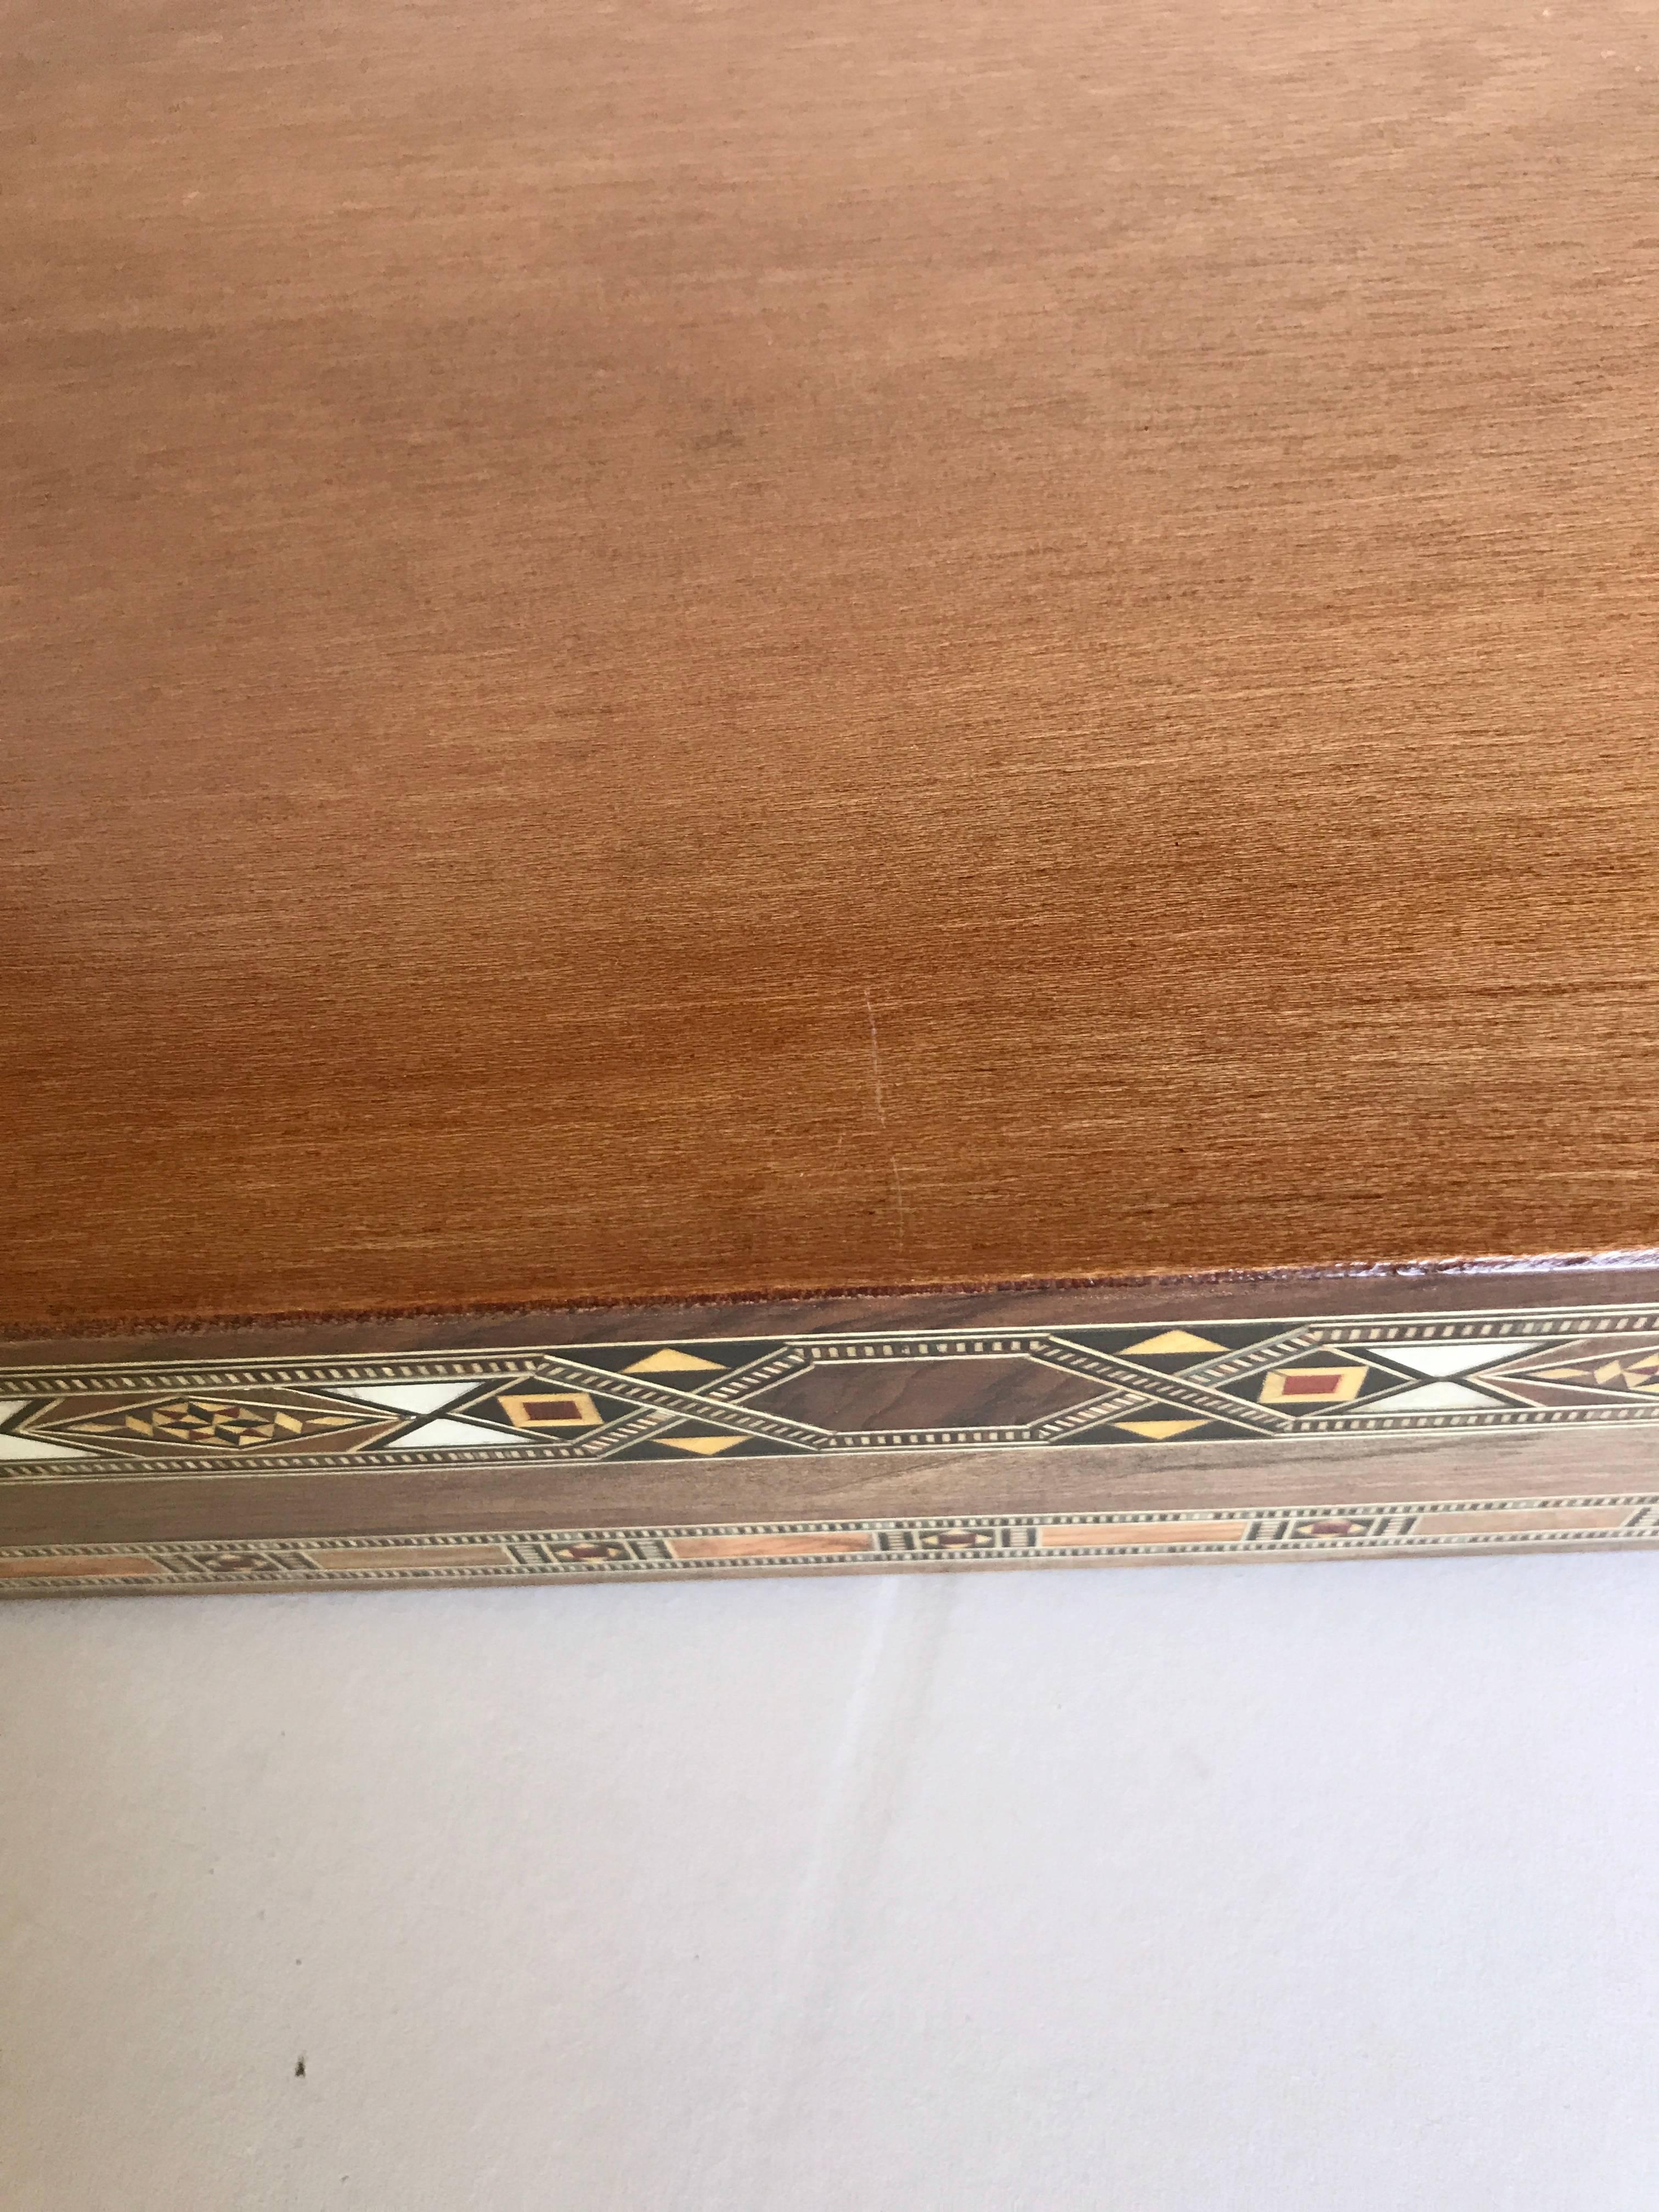 20th Century Syrian Walnut Wood Box Inlaid with Mother-of-Pearl, Cream Leather Lining